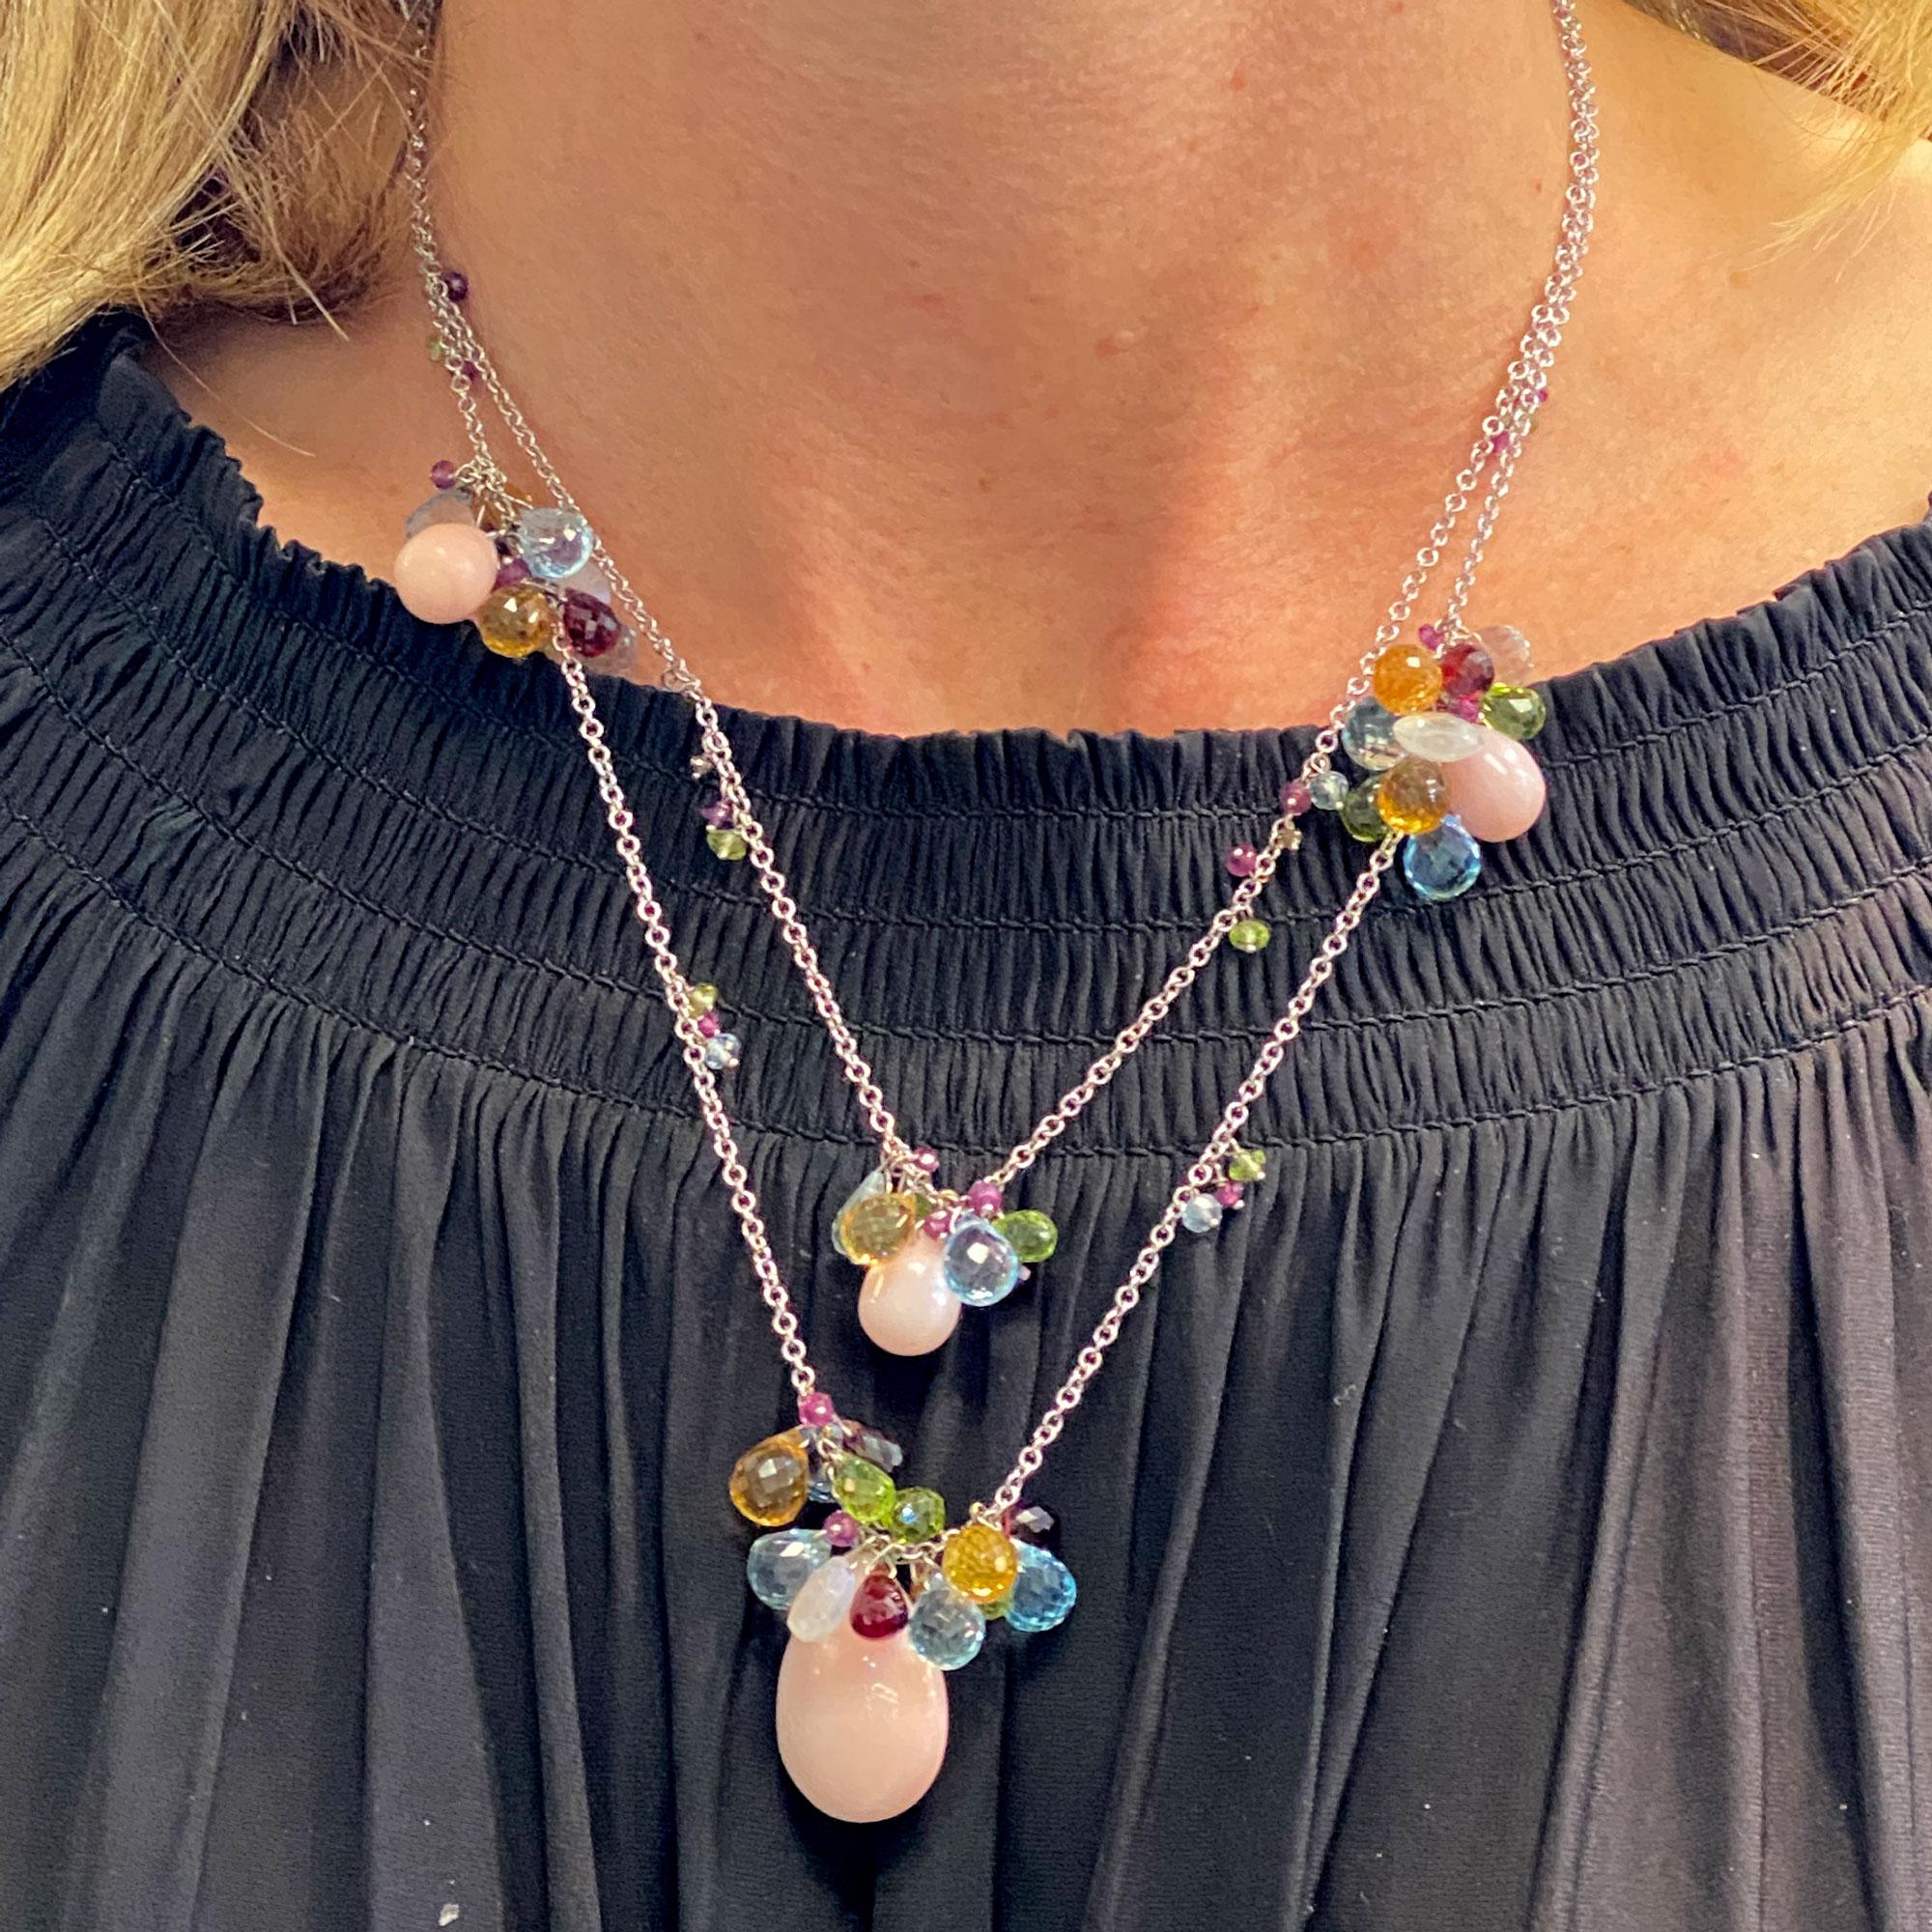 Colorful designer necklace by Italian designer Zoccai. The two strand necklace features multi-color briolette cut gemstones and large coral drops. The necklace is fashioned in 18 karat white gold and the shorter strand measures 16 inches in length. 